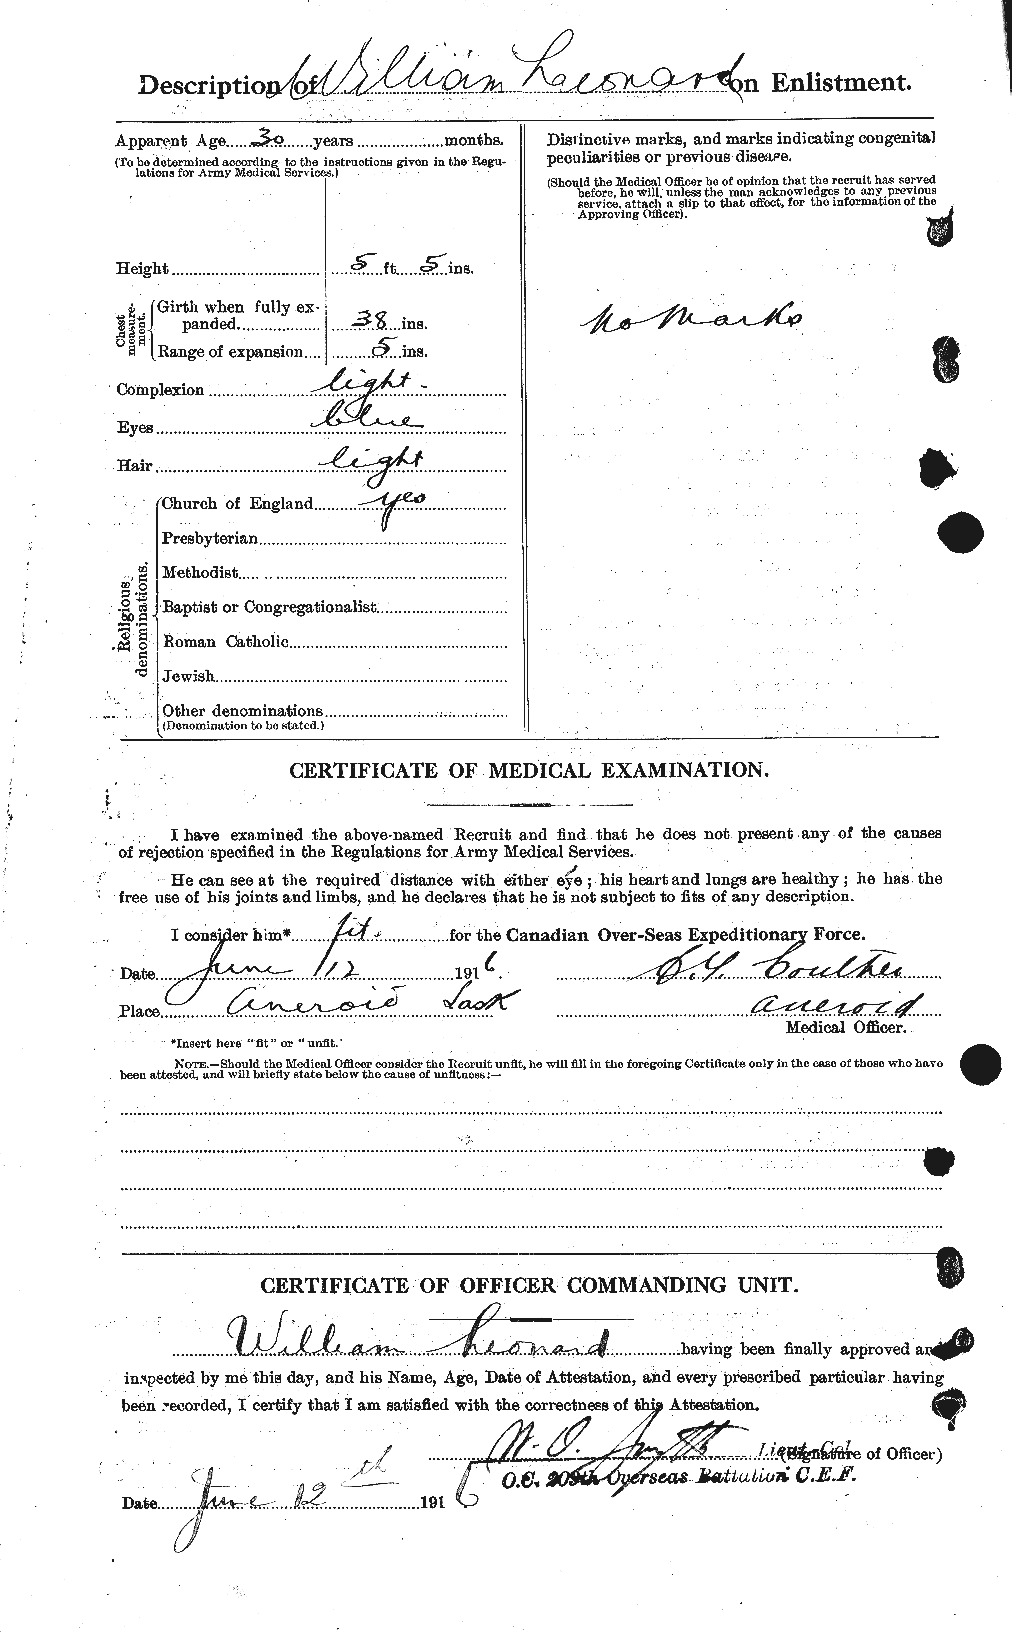 Personnel Records of the First World War - CEF 460872b